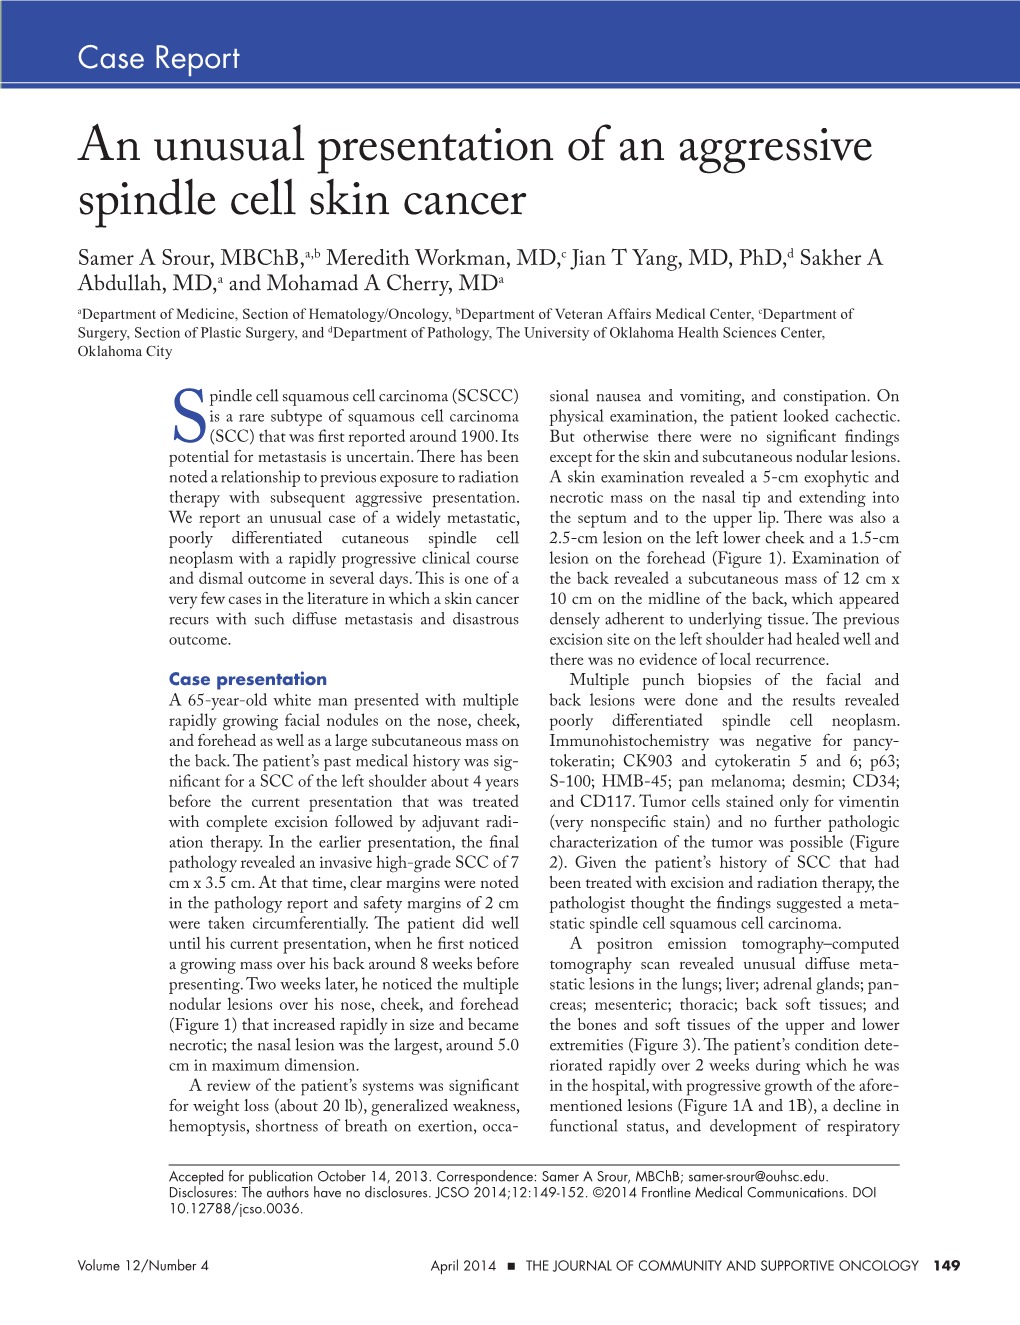 An Unusual Presentation of an Aggressive Spindle Cell Skin Cancer